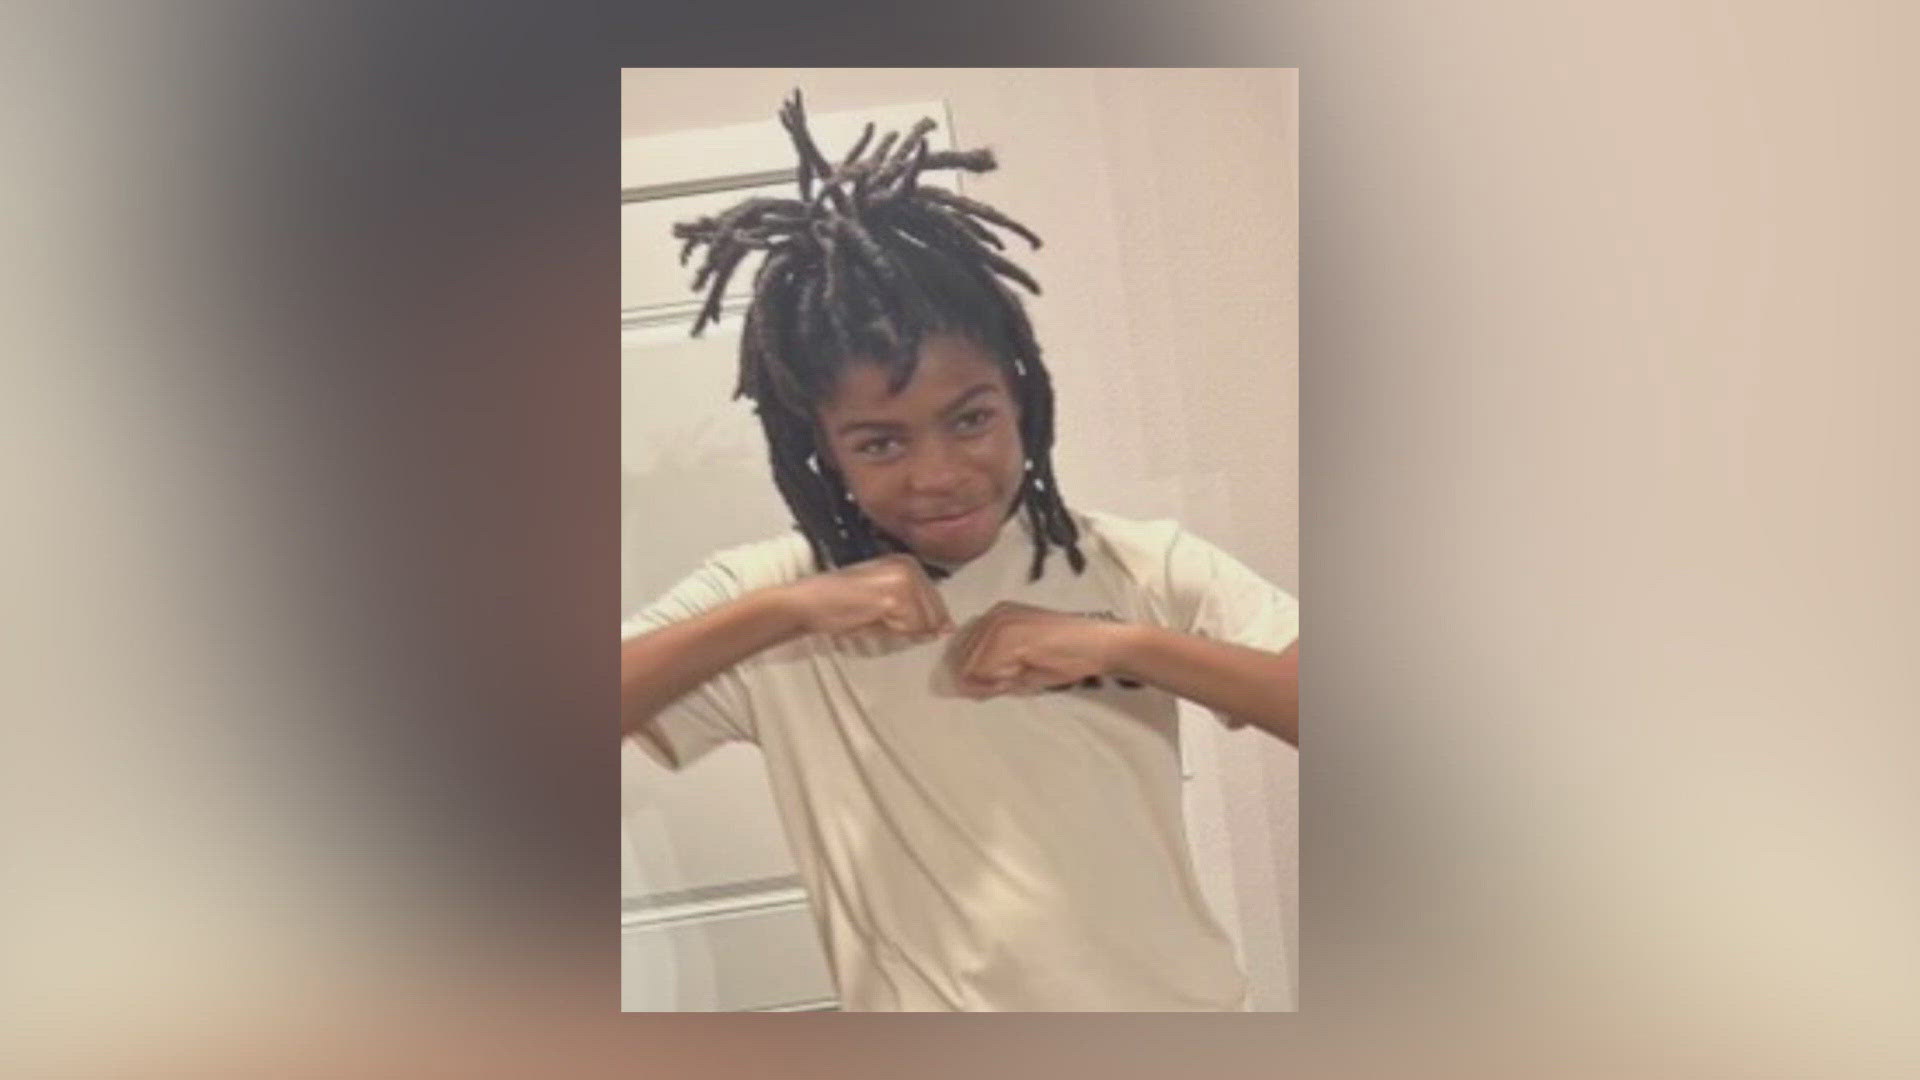 Jaylen's mother communicated with him sometime Wednesday, but he never returned home.